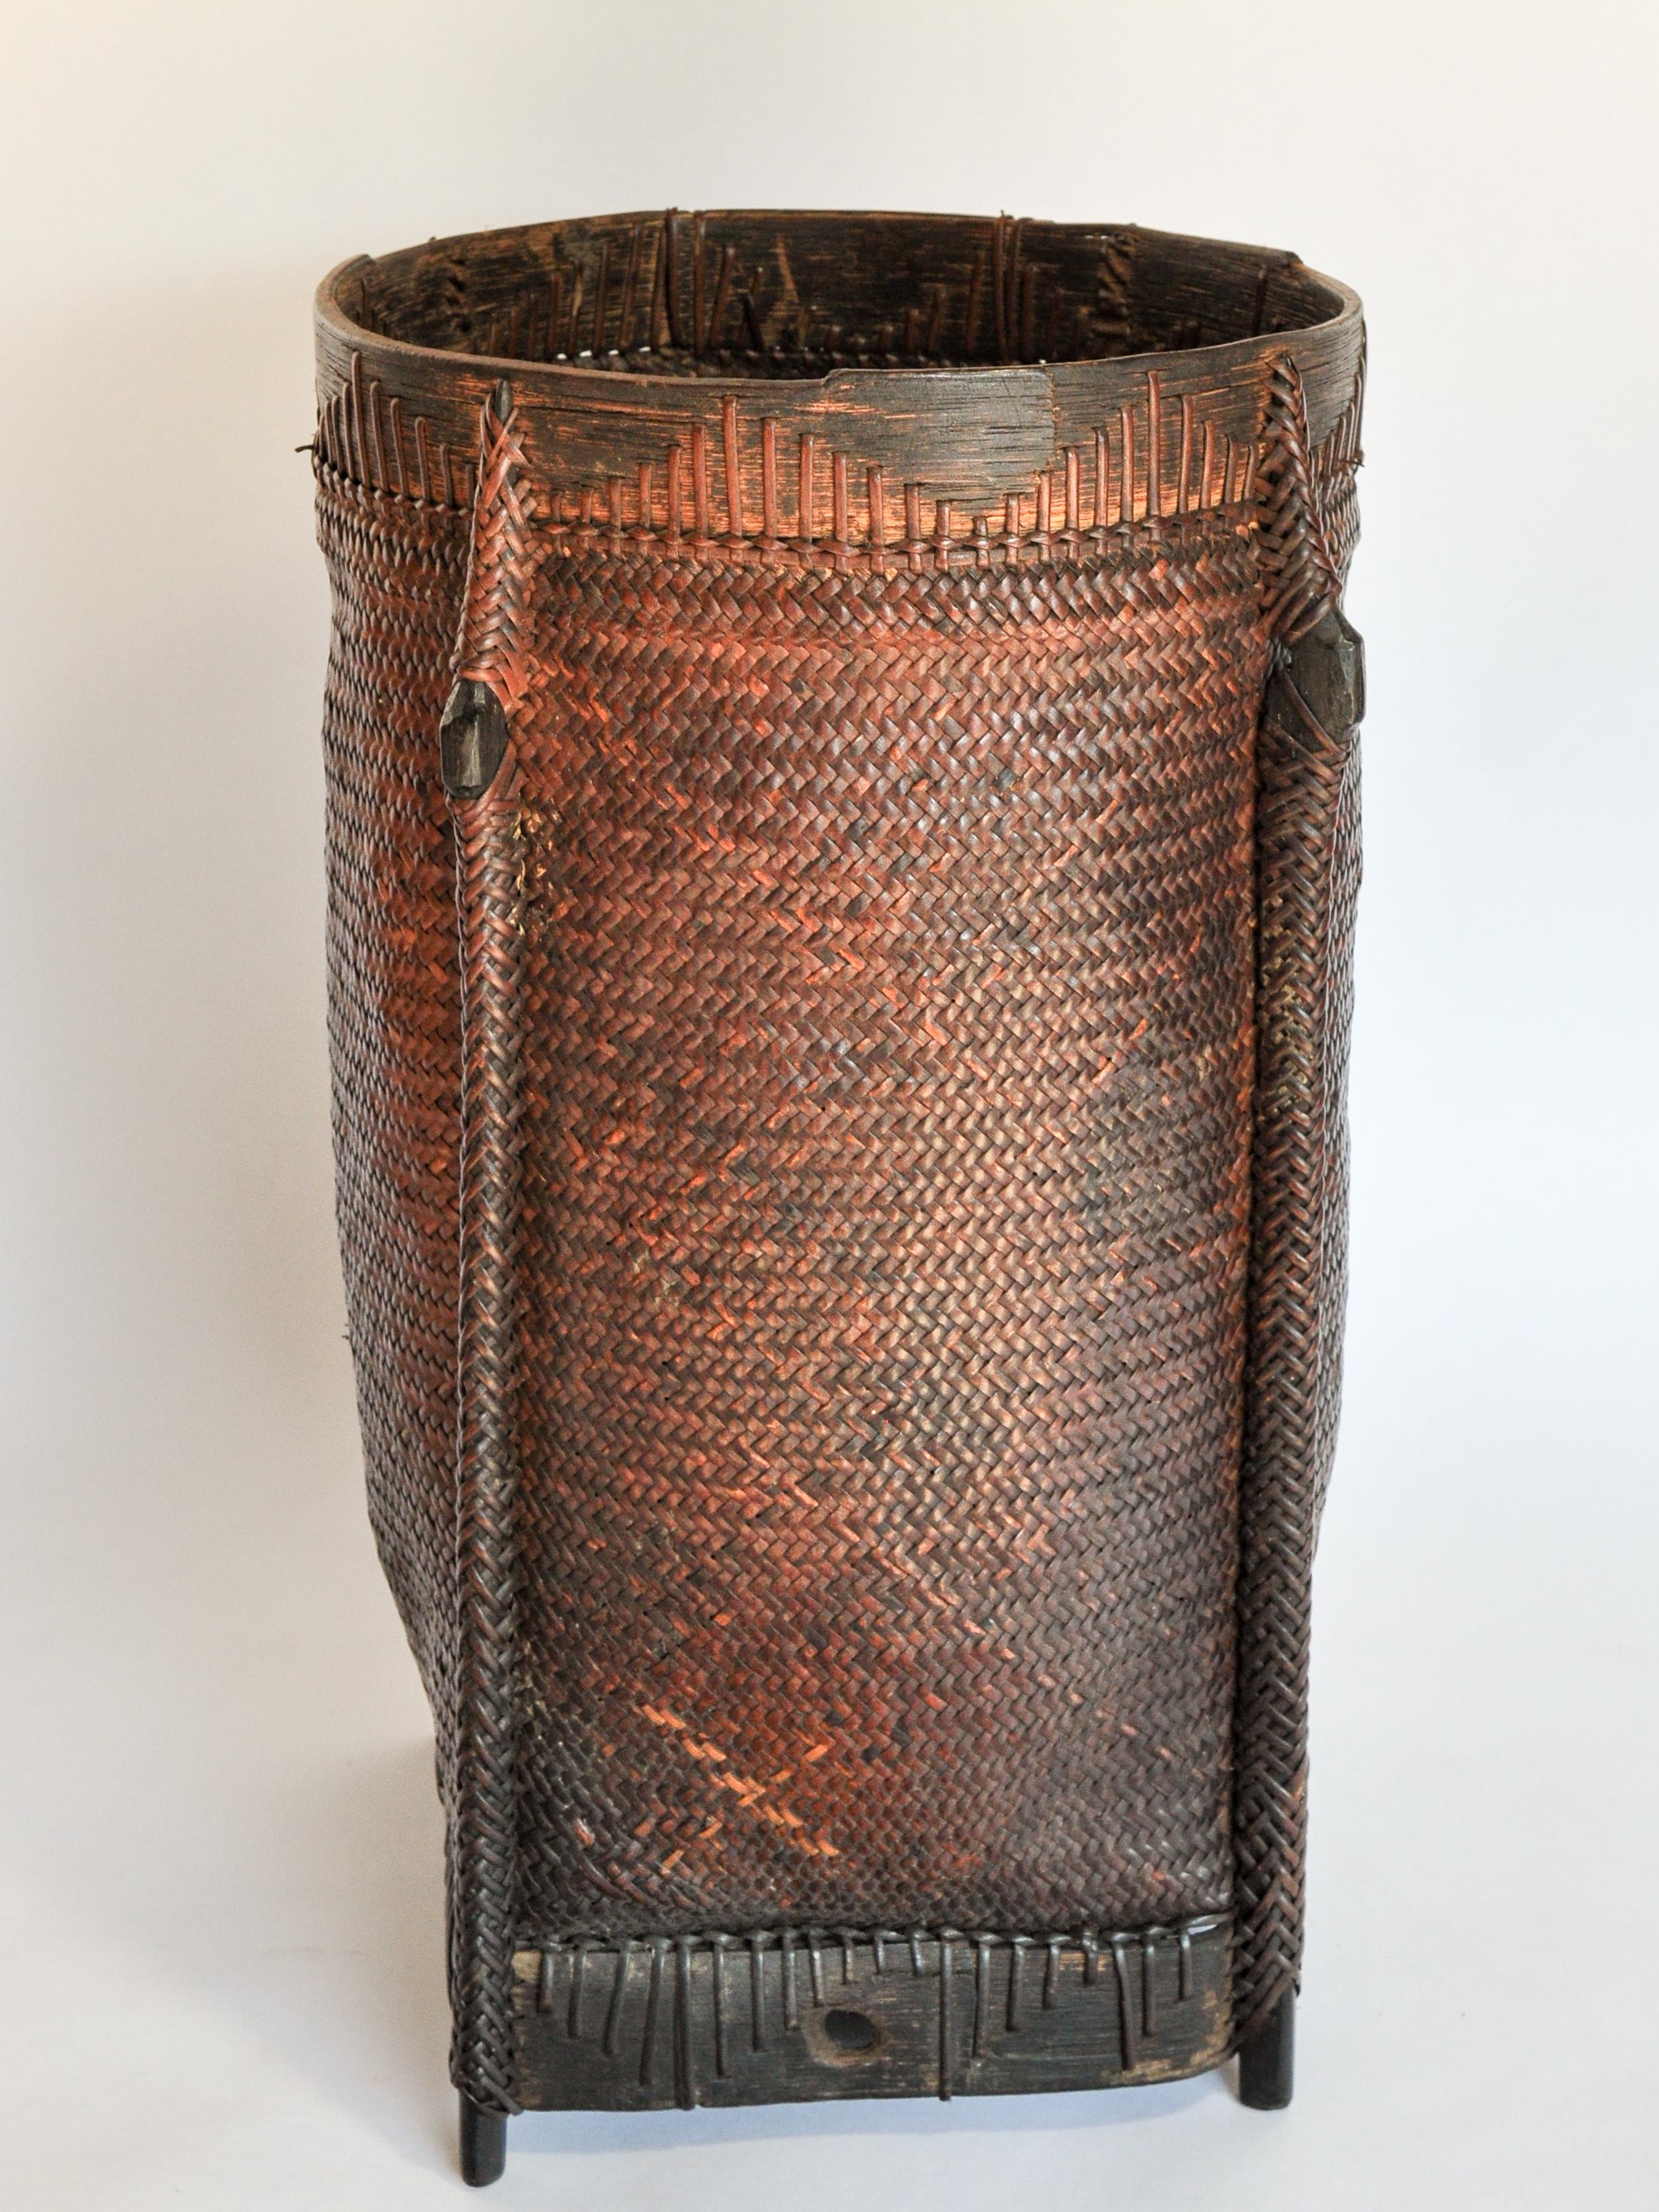 Tribal Carrying and Storage Basket from Borneo. 9.5